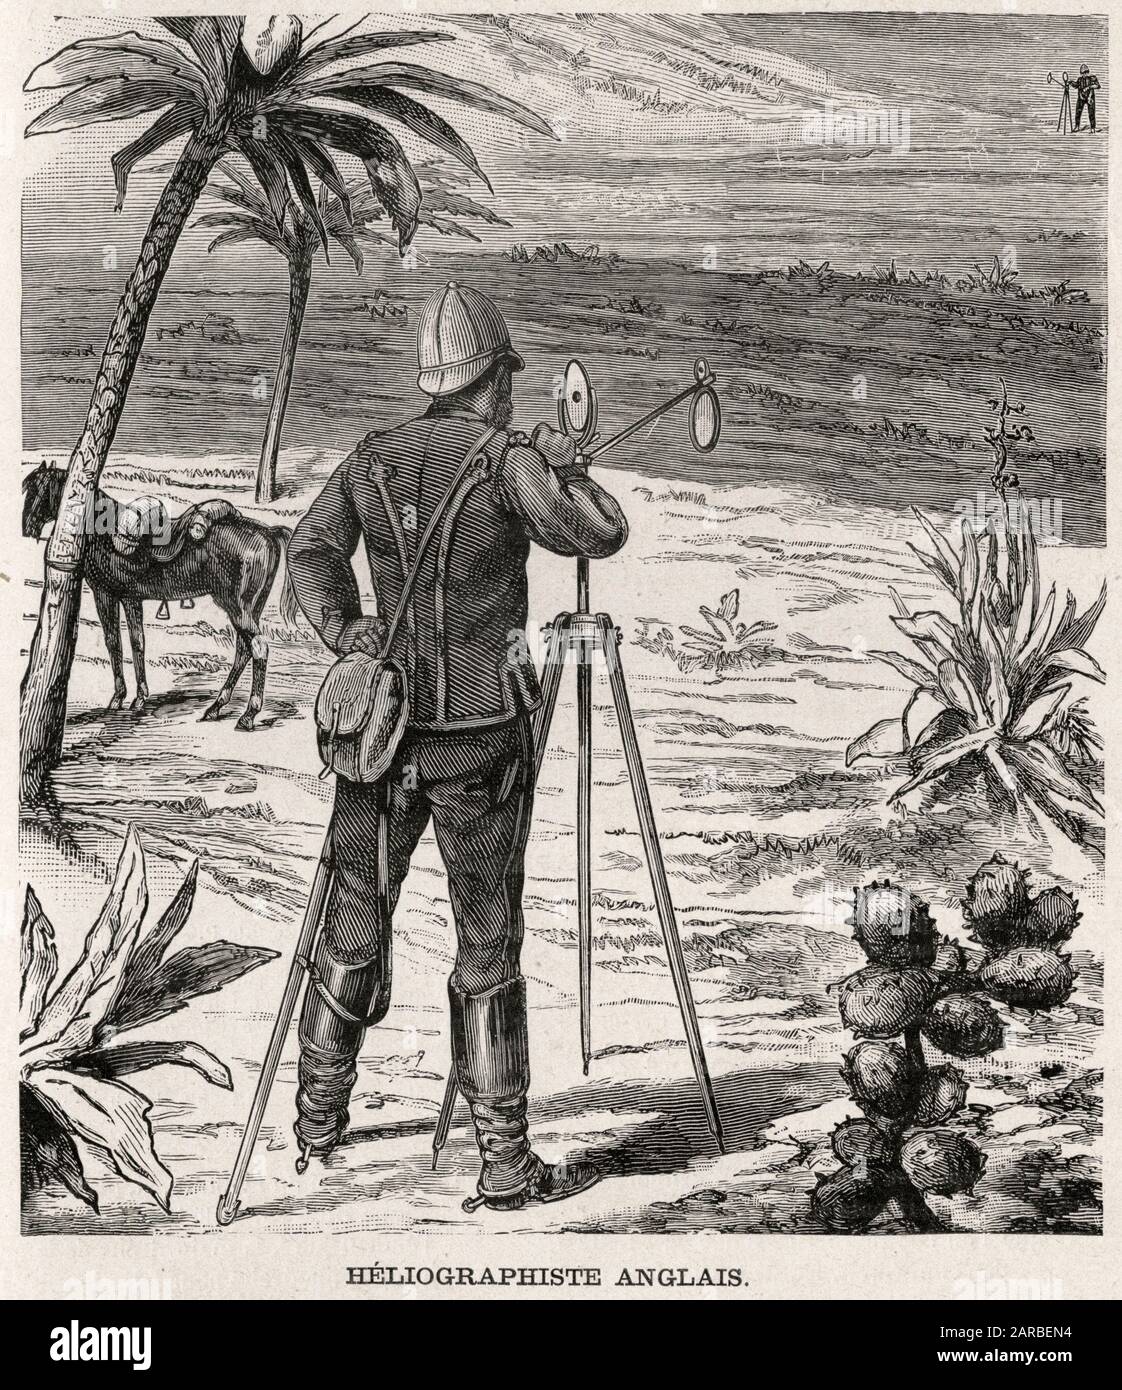 Heliograph used in the British army in Africa, probably during the Boer War (1899-1902). The heliograph is a wireless telegraph that signals by flashes of sunlight (generally using Morse code) reflected by a mirror.     Date: C.1900 Stock Photo